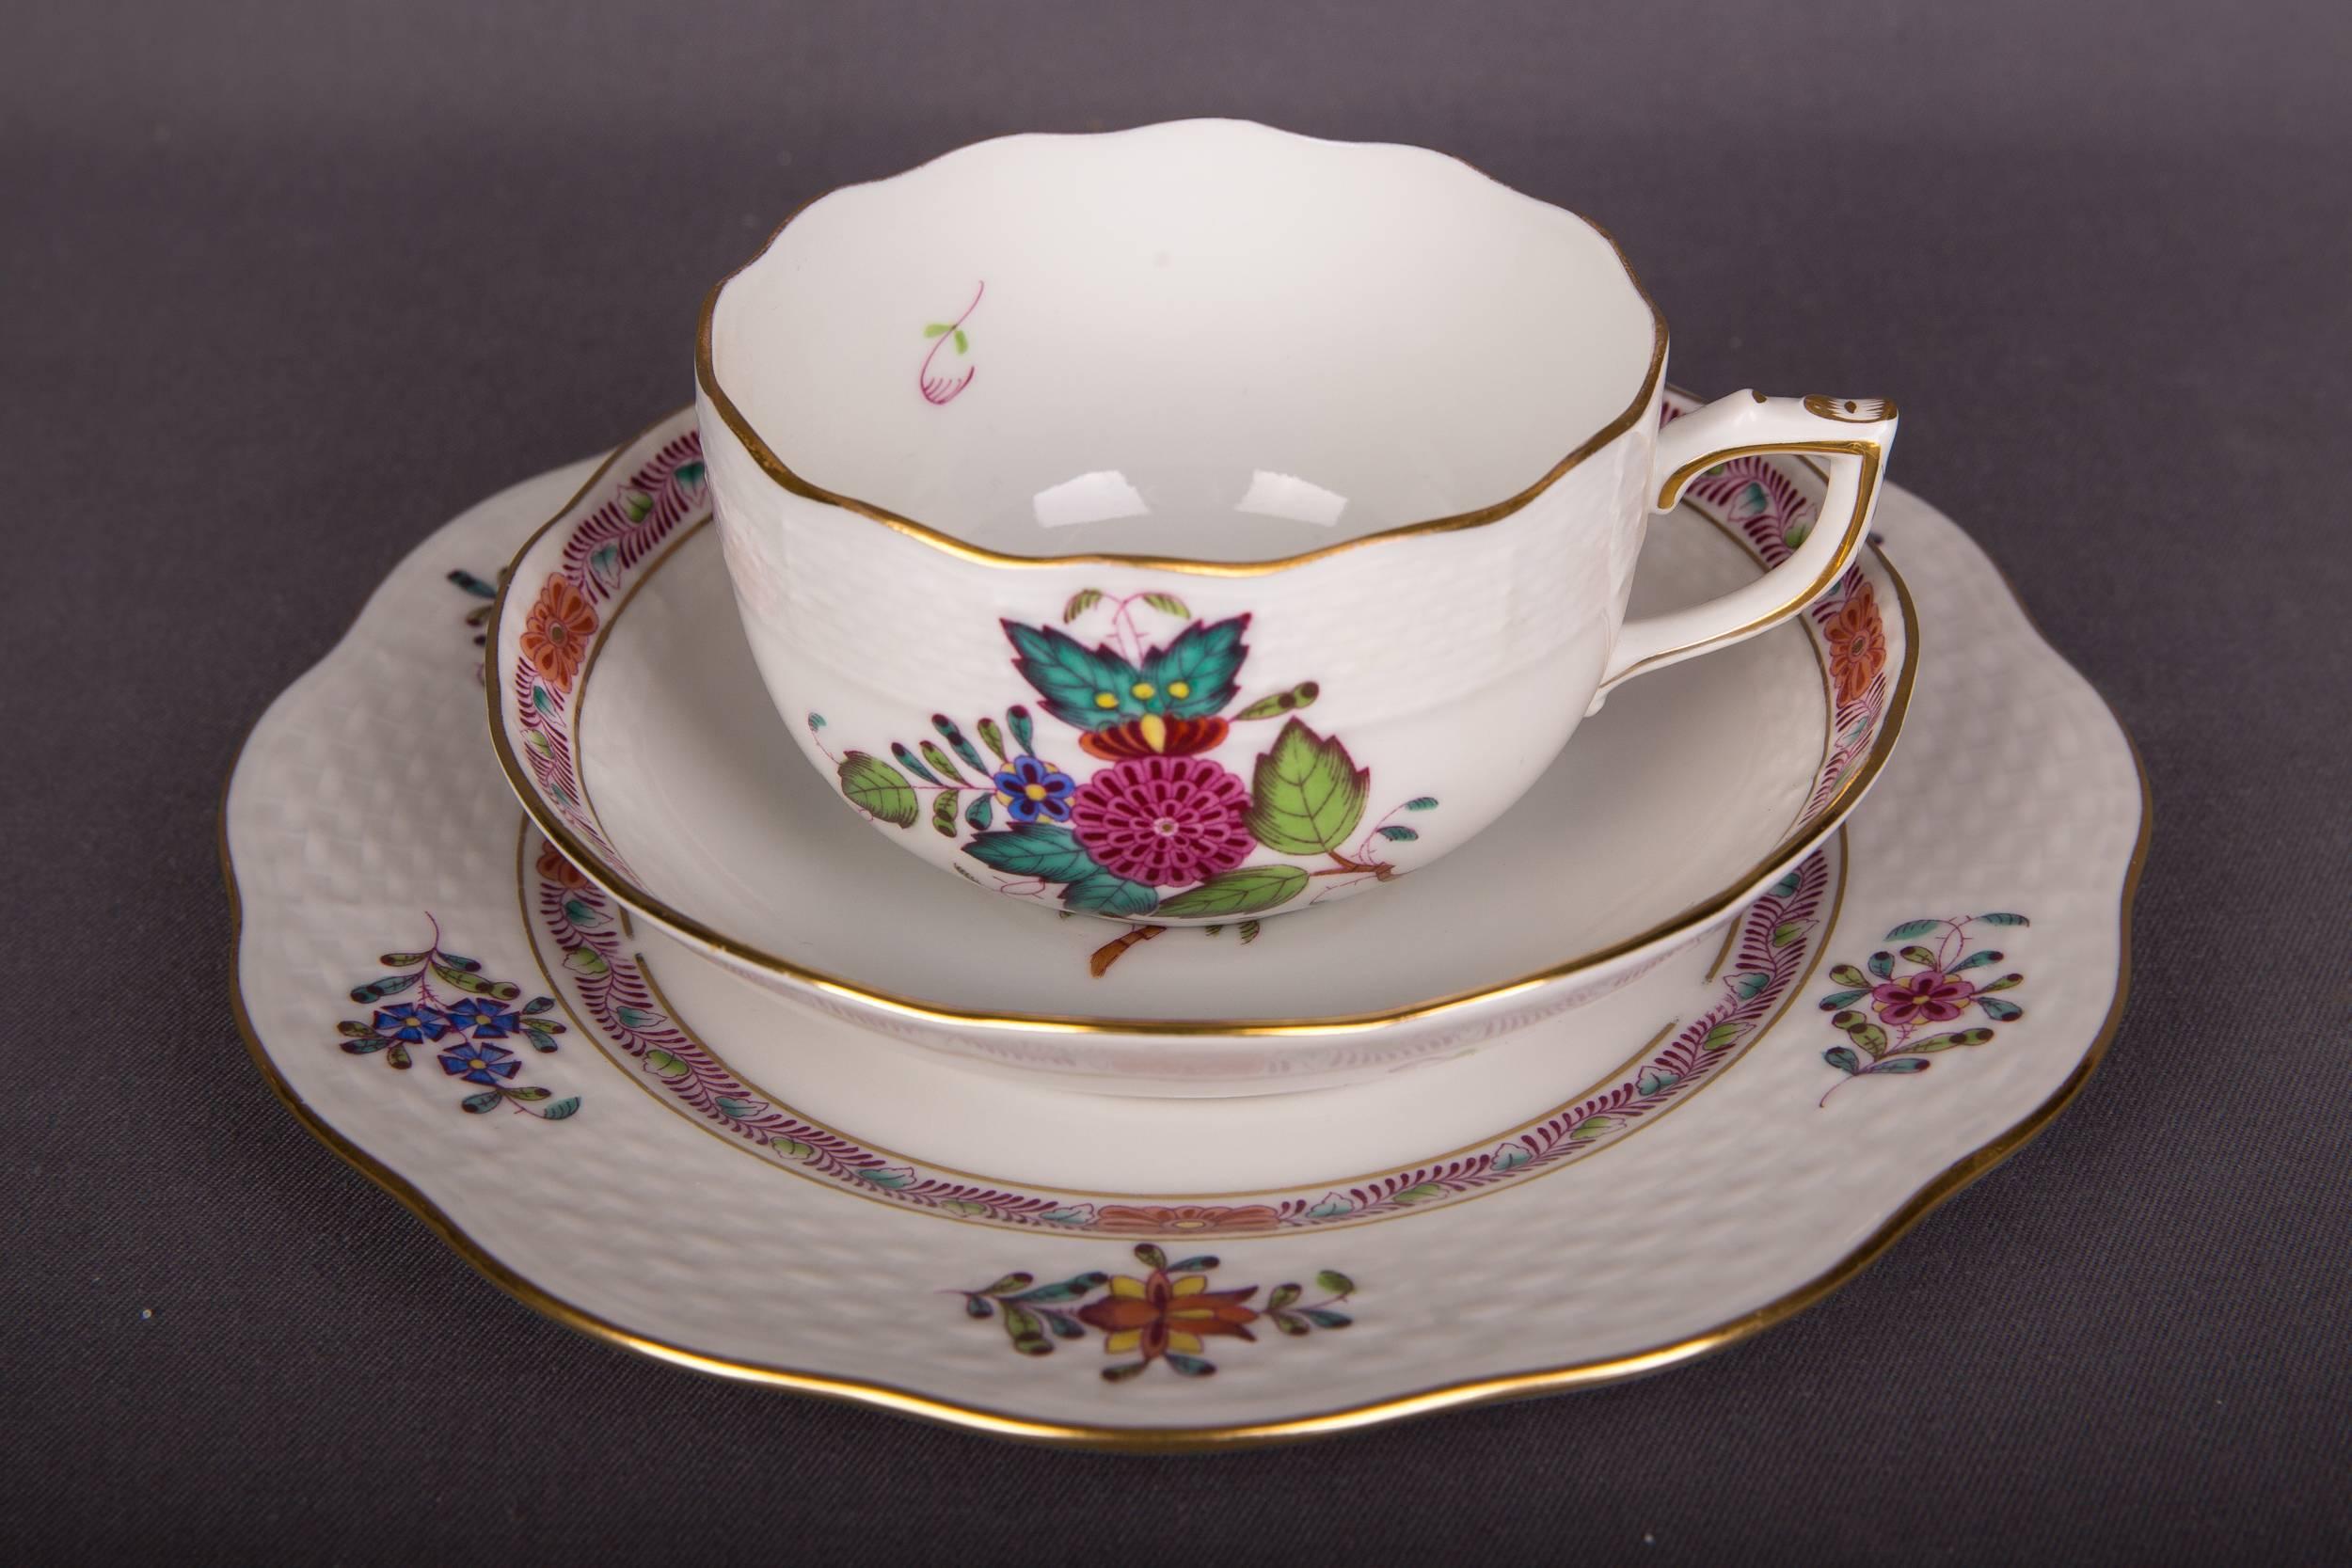 Hungarian Beautiful Rare Herend Coffee Service Porcelain with Lots of Flowers and Gold